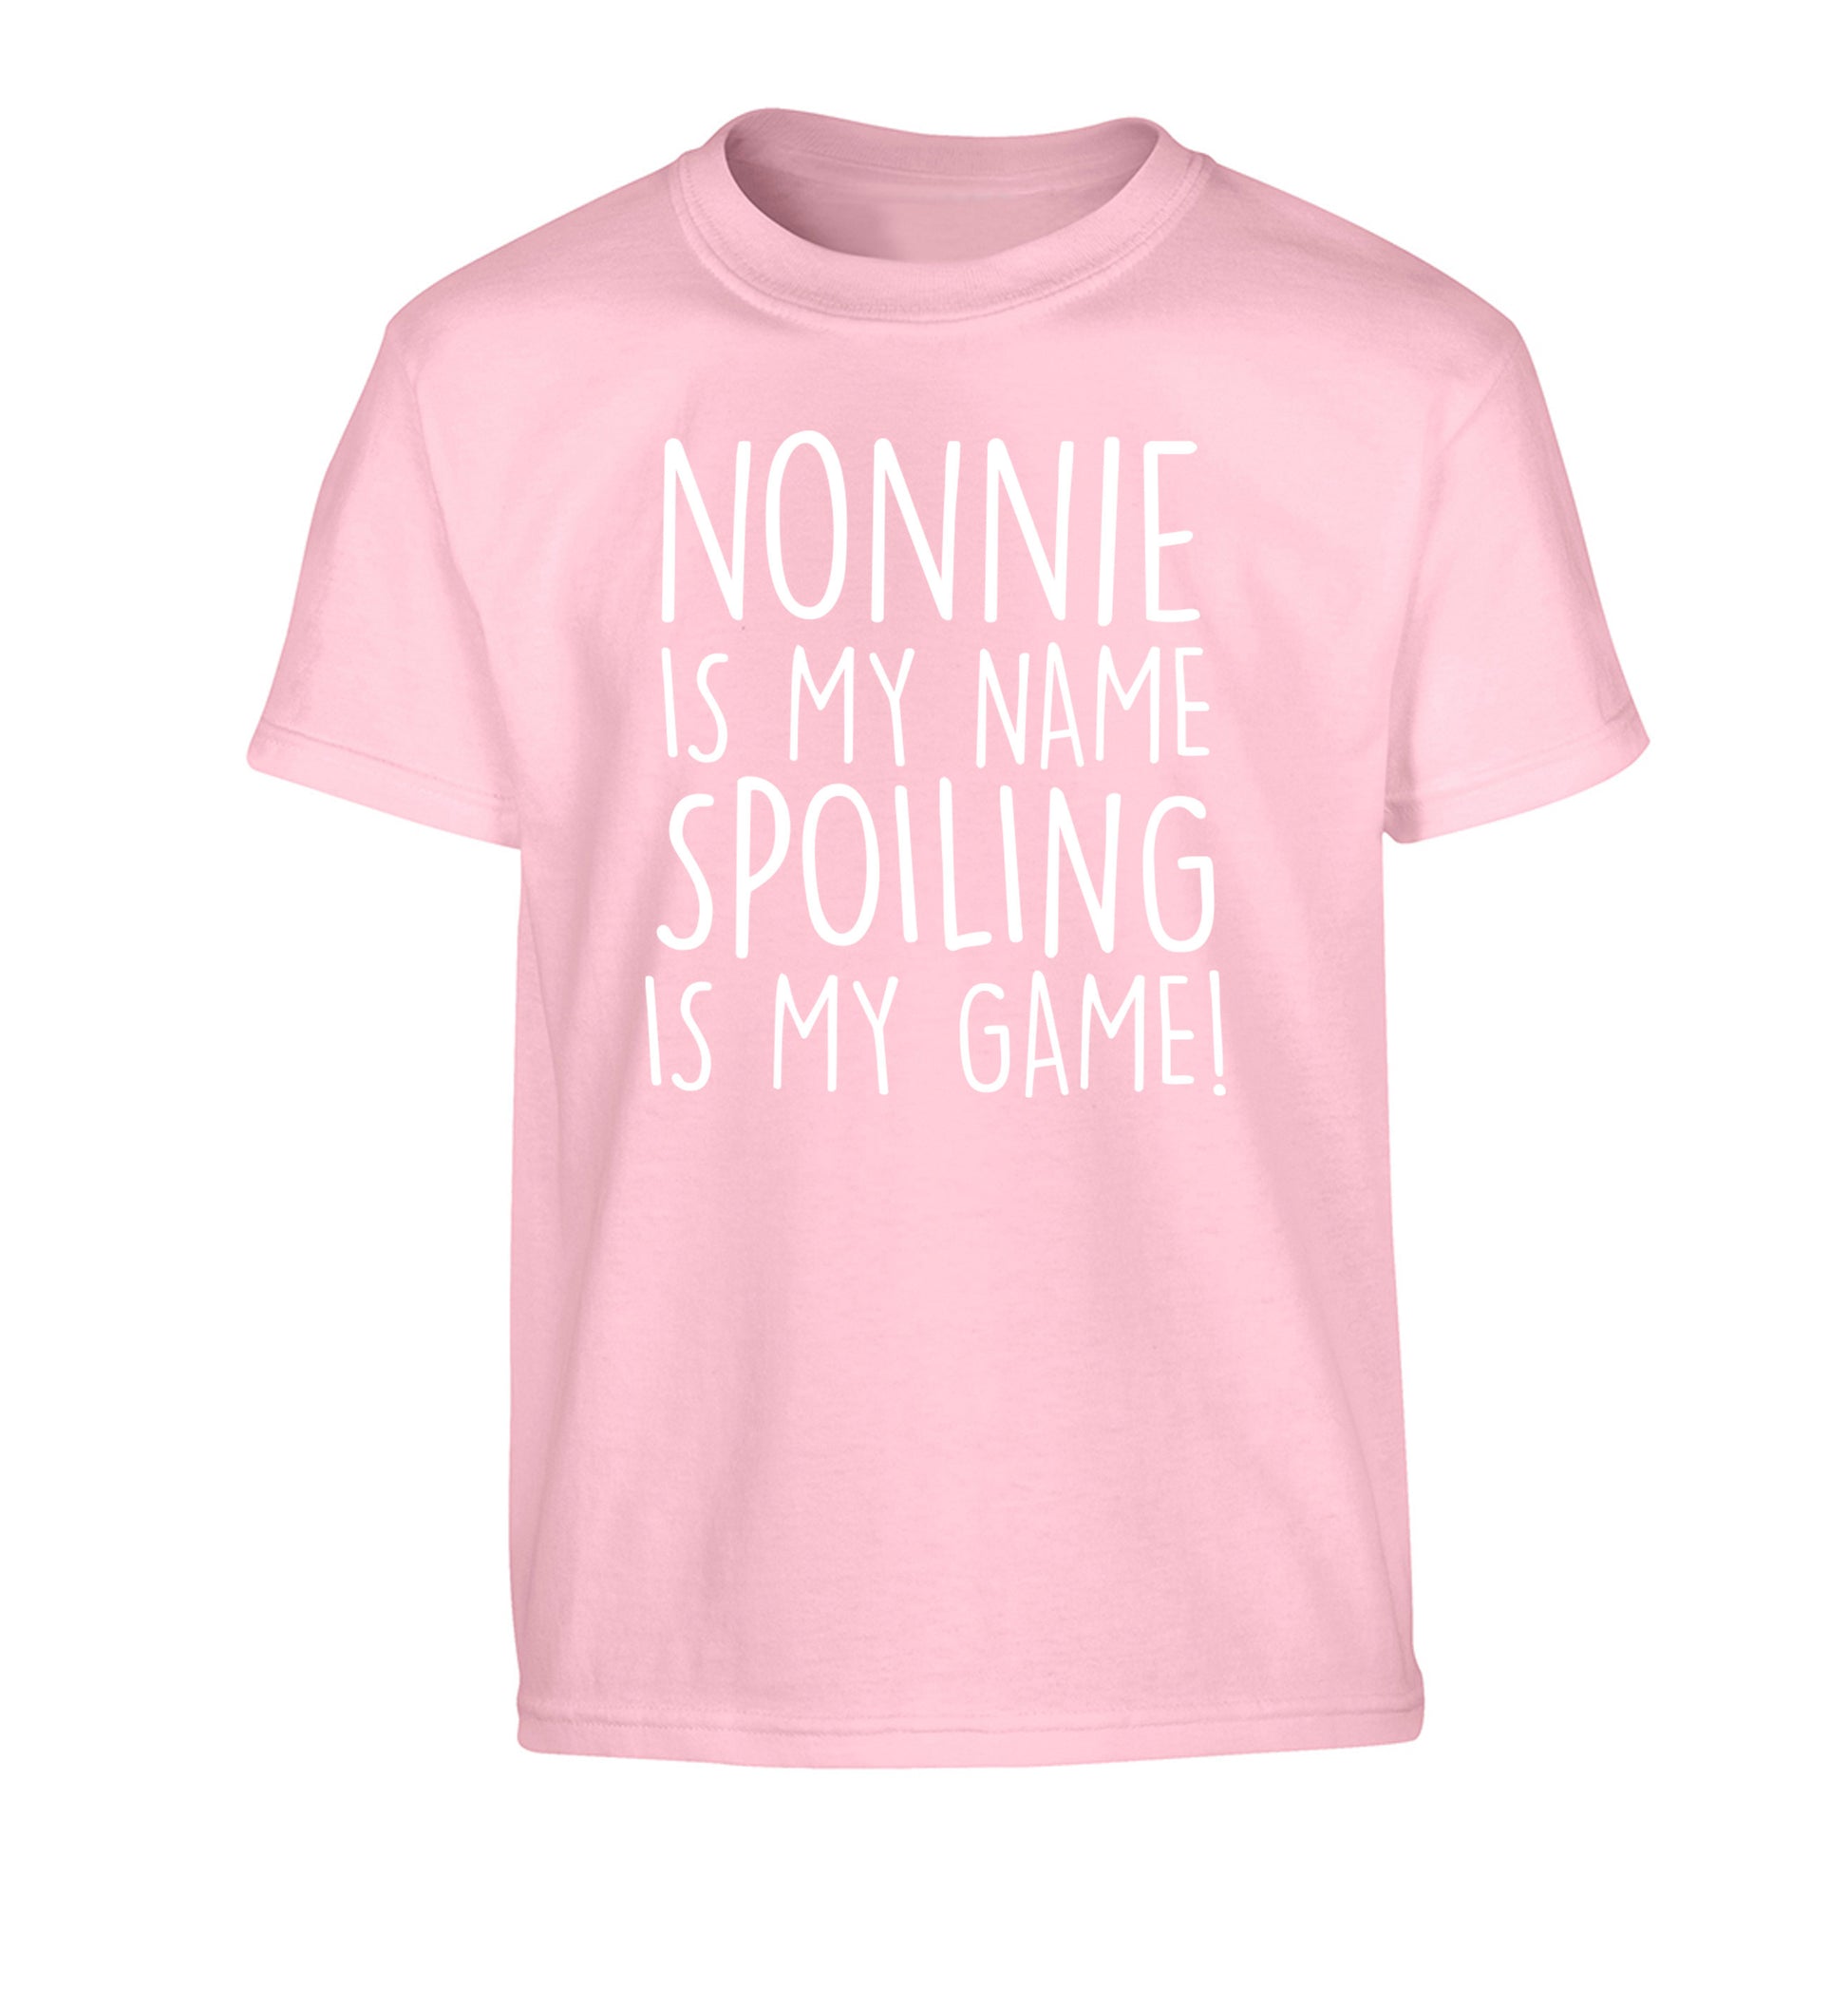 Nonnie is my name, spoiling is my game Children's light pink Tshirt 12-14 Years